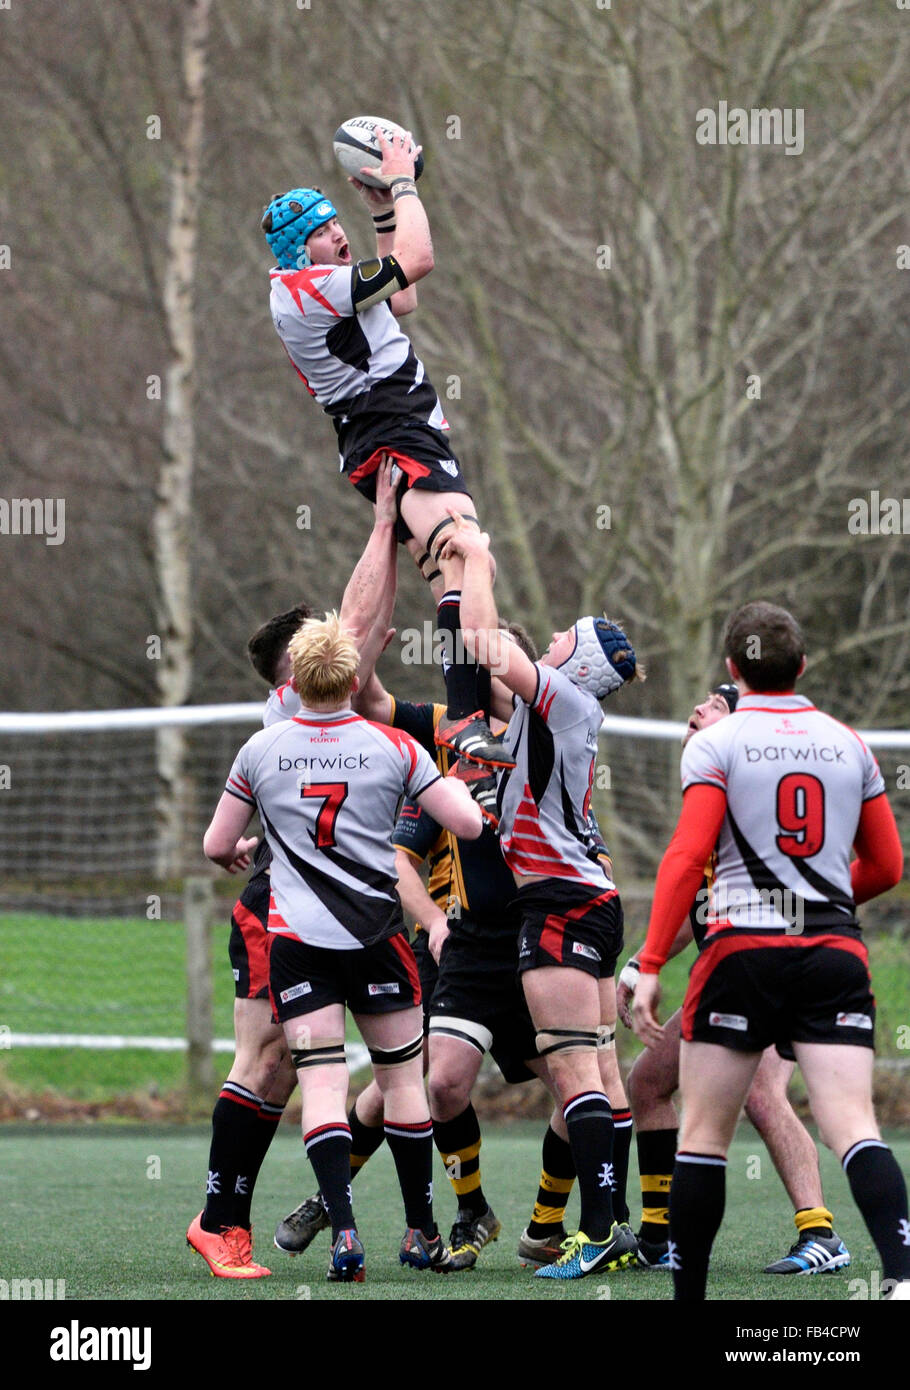 Burnage  9th January 2016 An Ilkley player wins the ball at a line-out in a match, in which  Burnage Rugby Club were attempting to move from bottom place in the league but heavily defeated by Ilkley, who were third bottom. Credit:  John Fryer/Alamy Live News Stock Photo